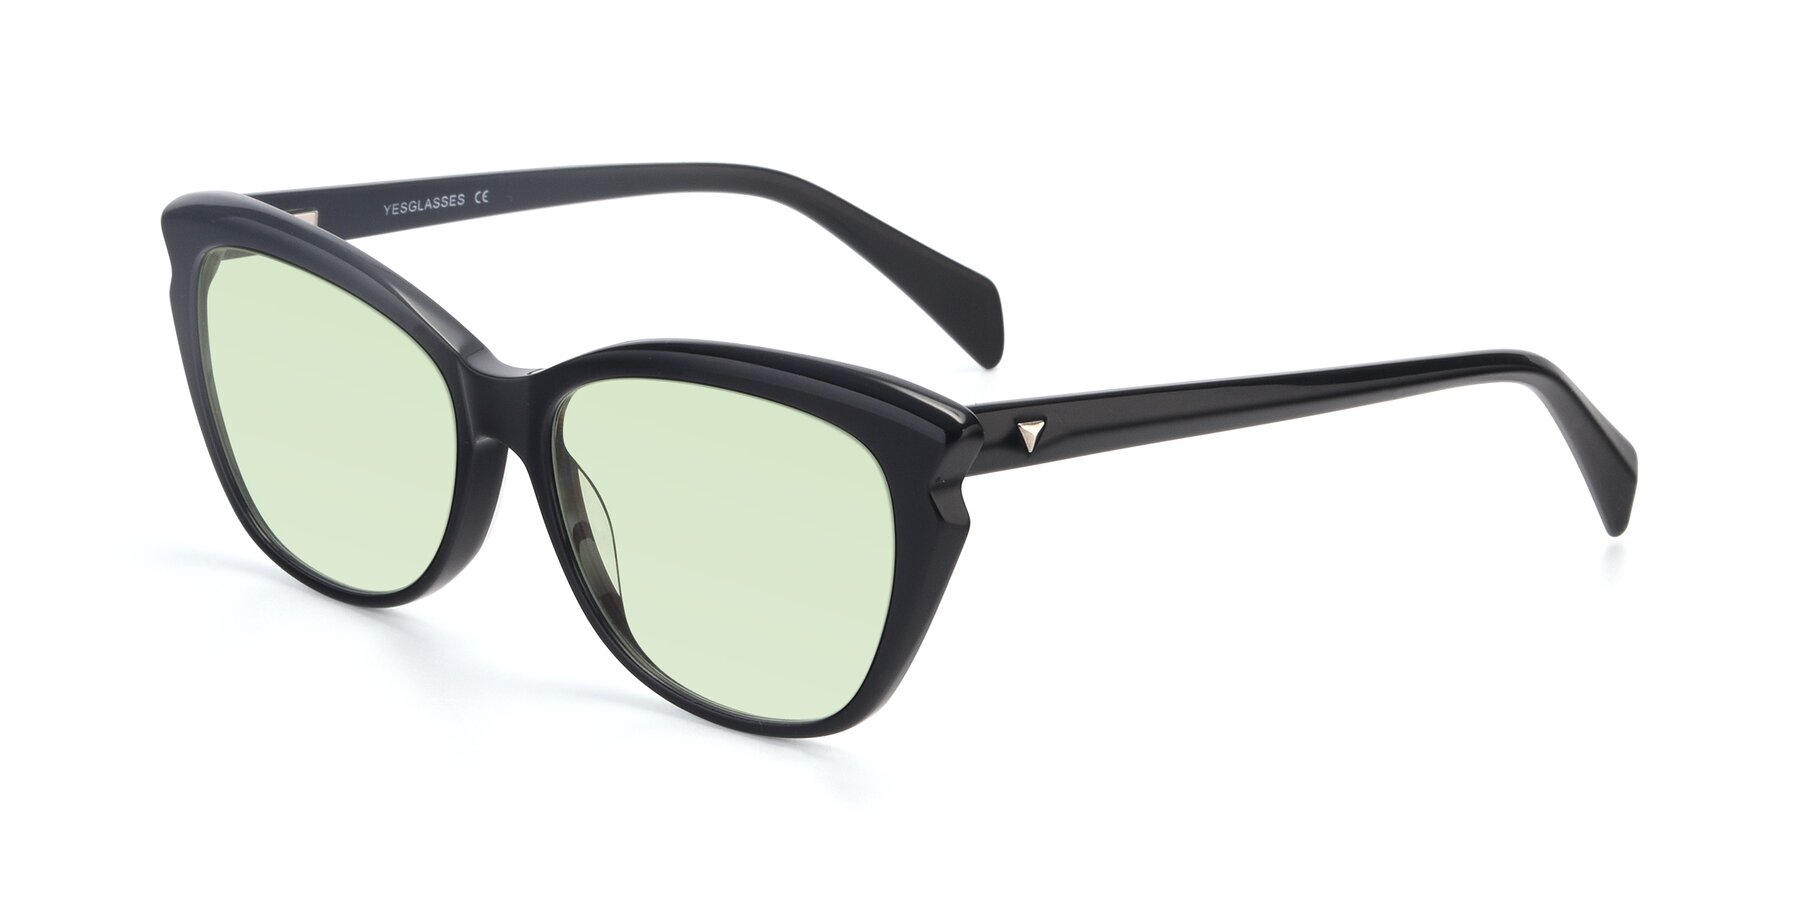 Angle of 17629 in Black with Light Green Tinted Lenses